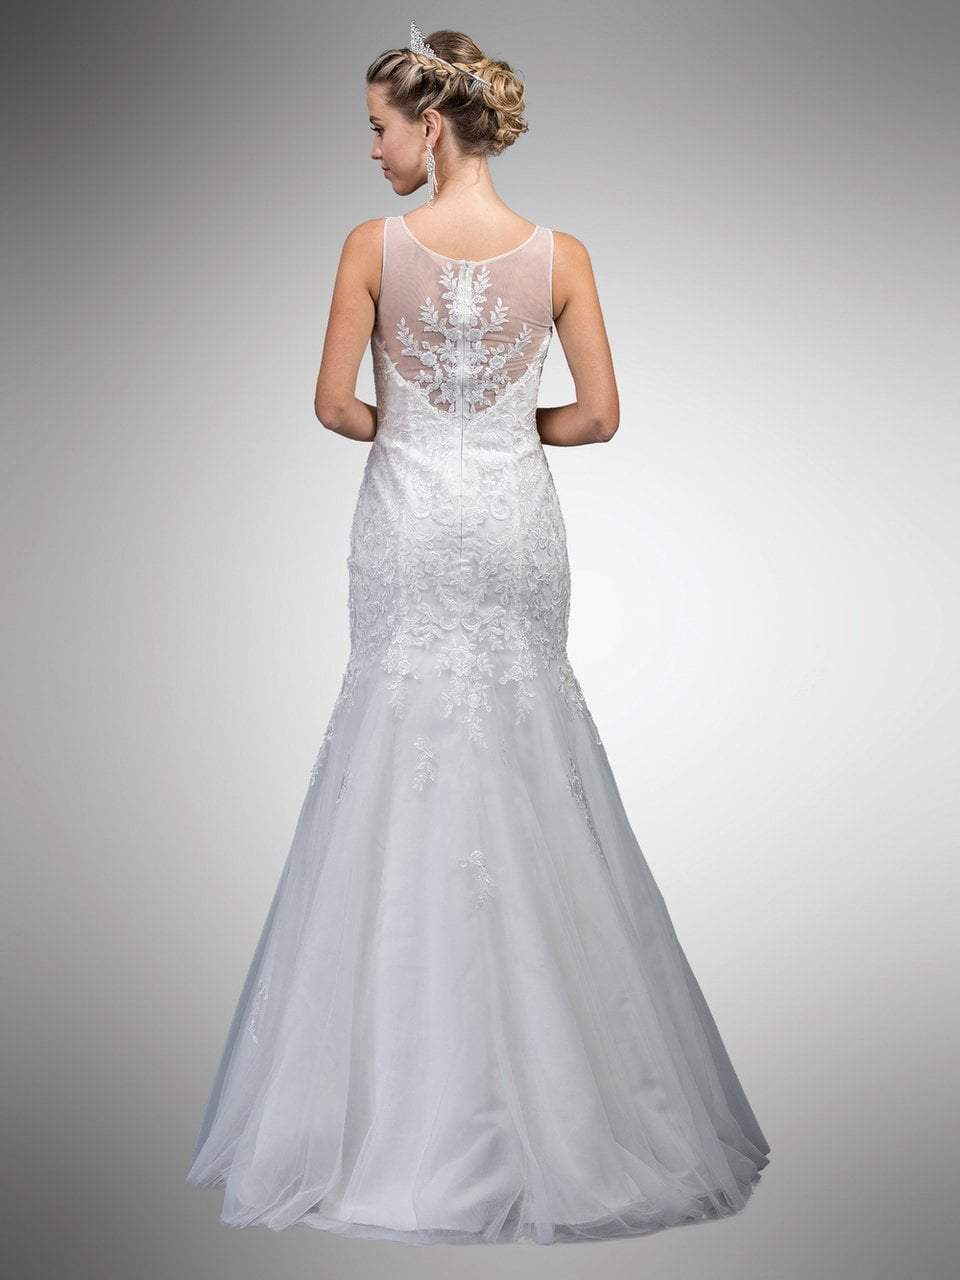 Dancing Queen Bridal - A7001 Sleeveless Beaded Lace Trumpet Gown Bridal Dresses